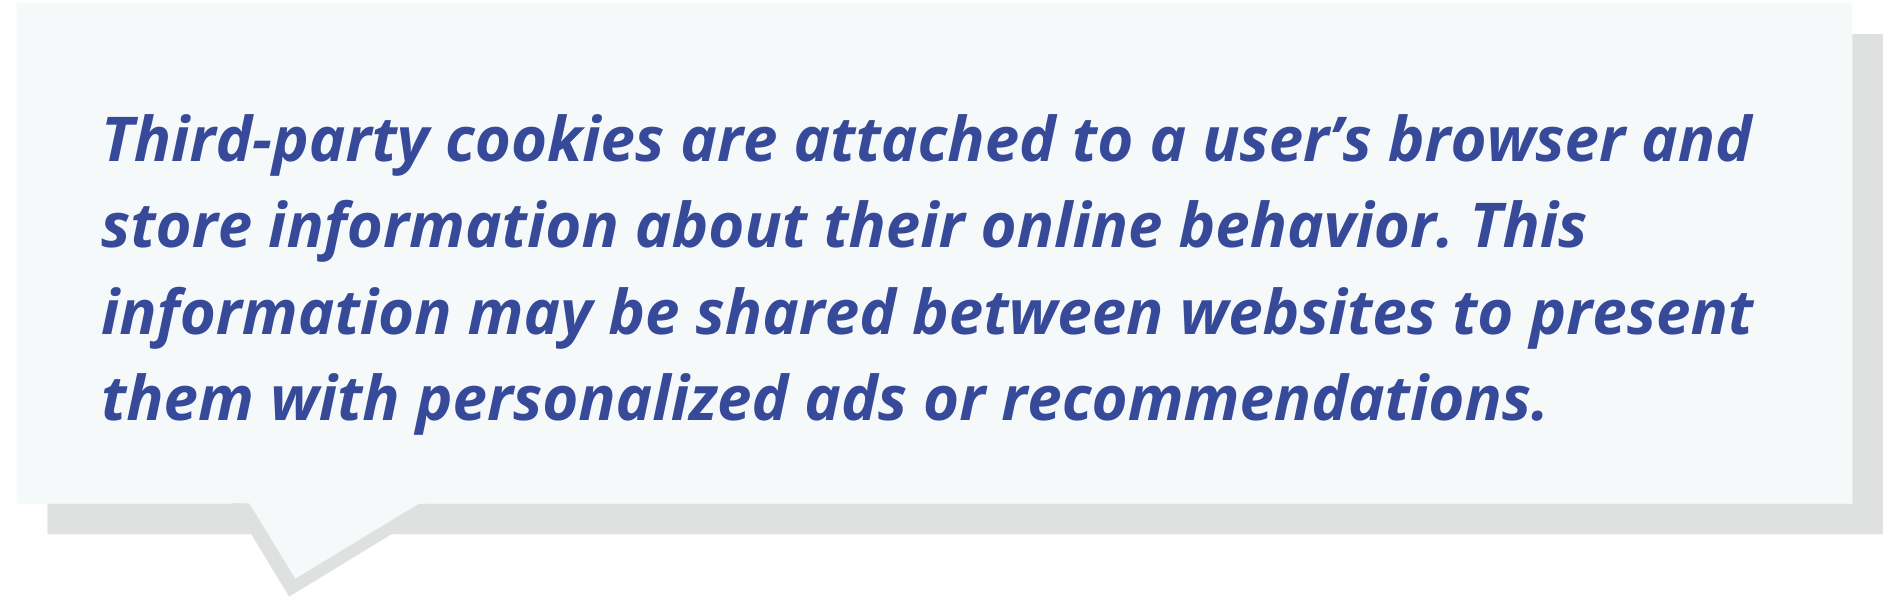 Third-party cookies are attached to a user’s browser and store information about their online behavior.  This information may be shared between websites to present them with personalized ads or recommendations.